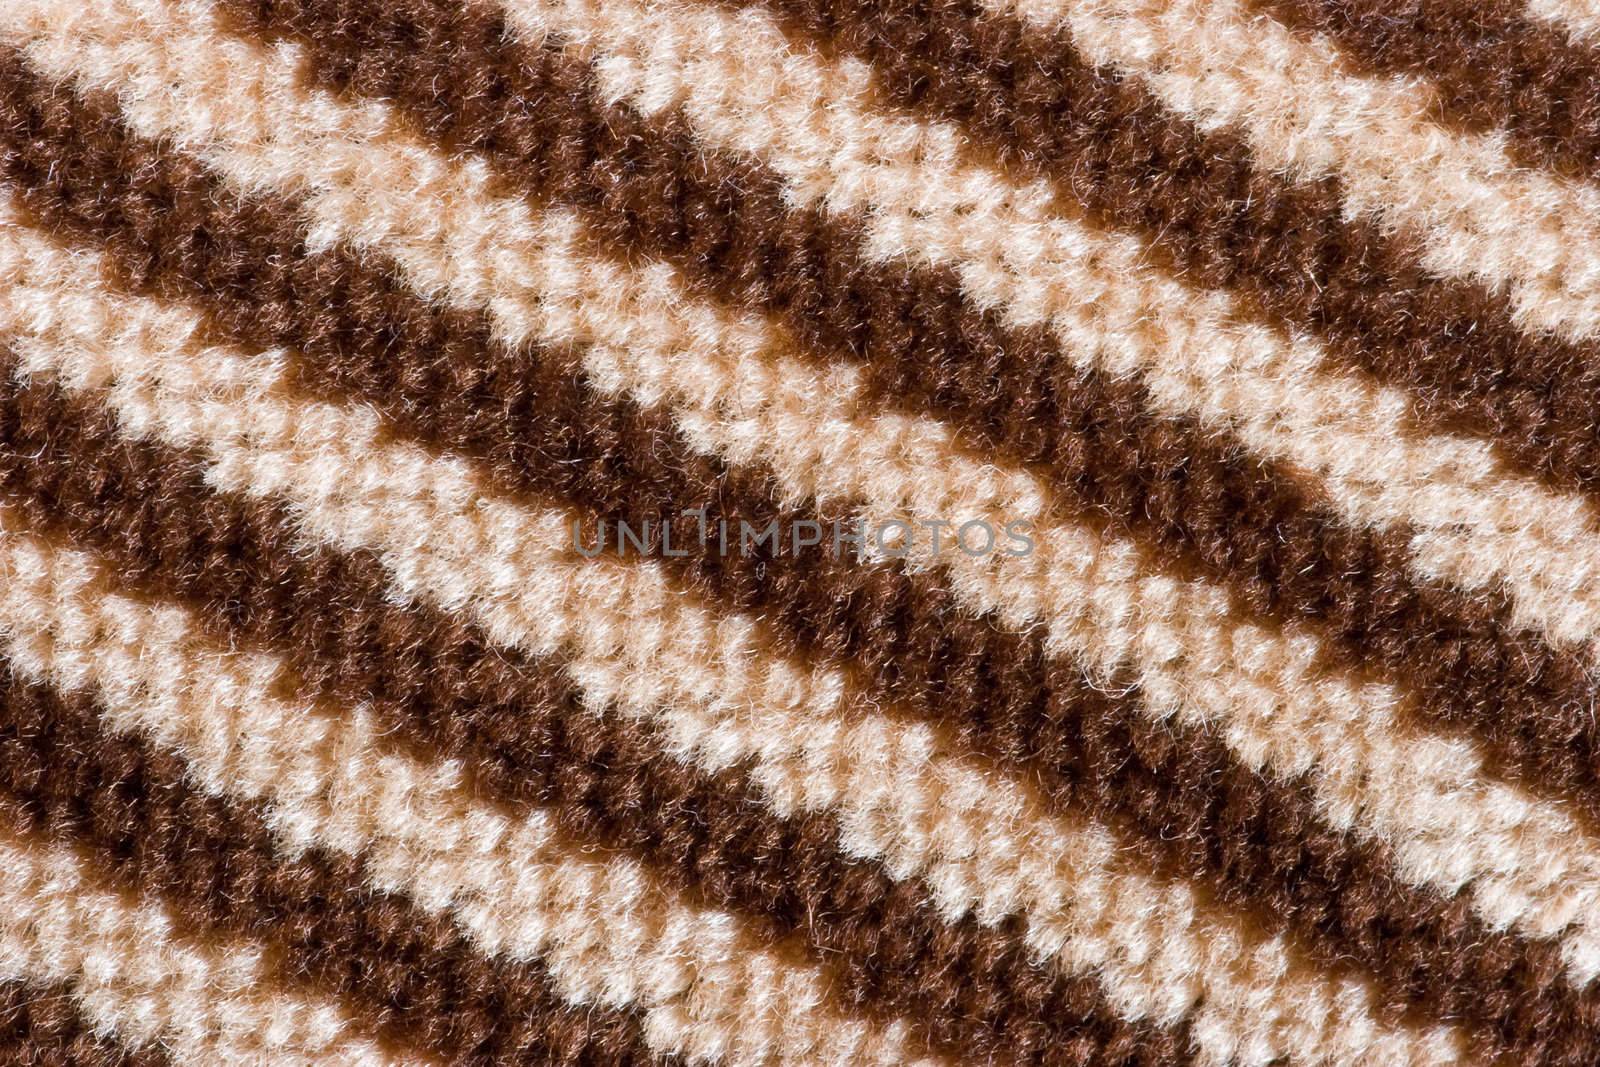 Brown striped fabric pattern close-up